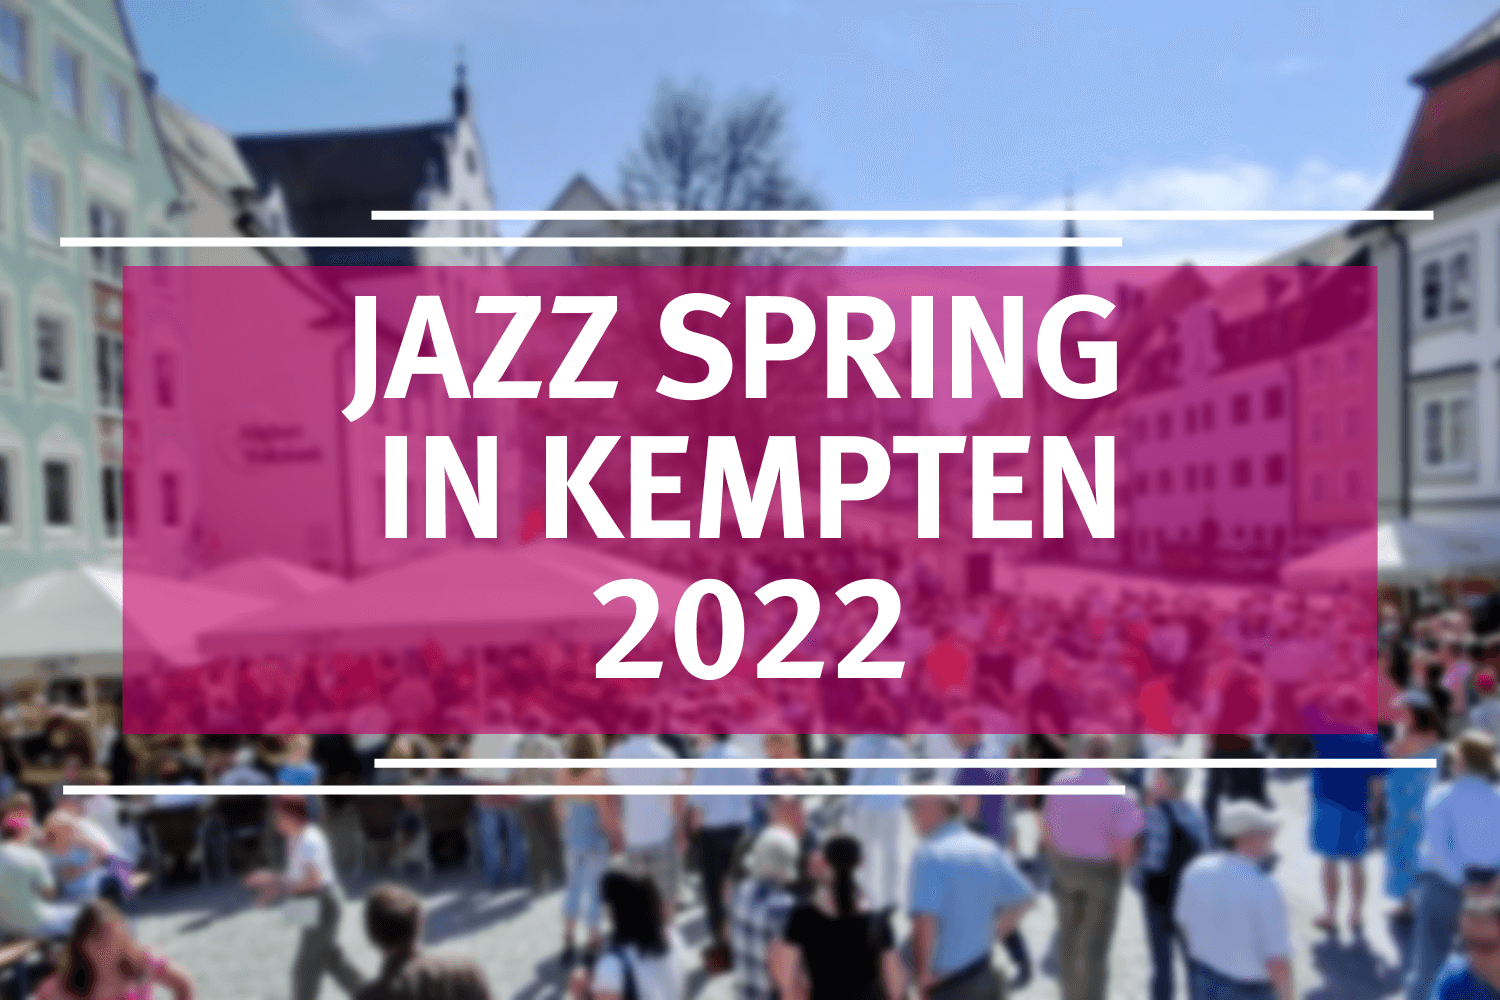 Soloplan is supporting this year’s Jazz Spring